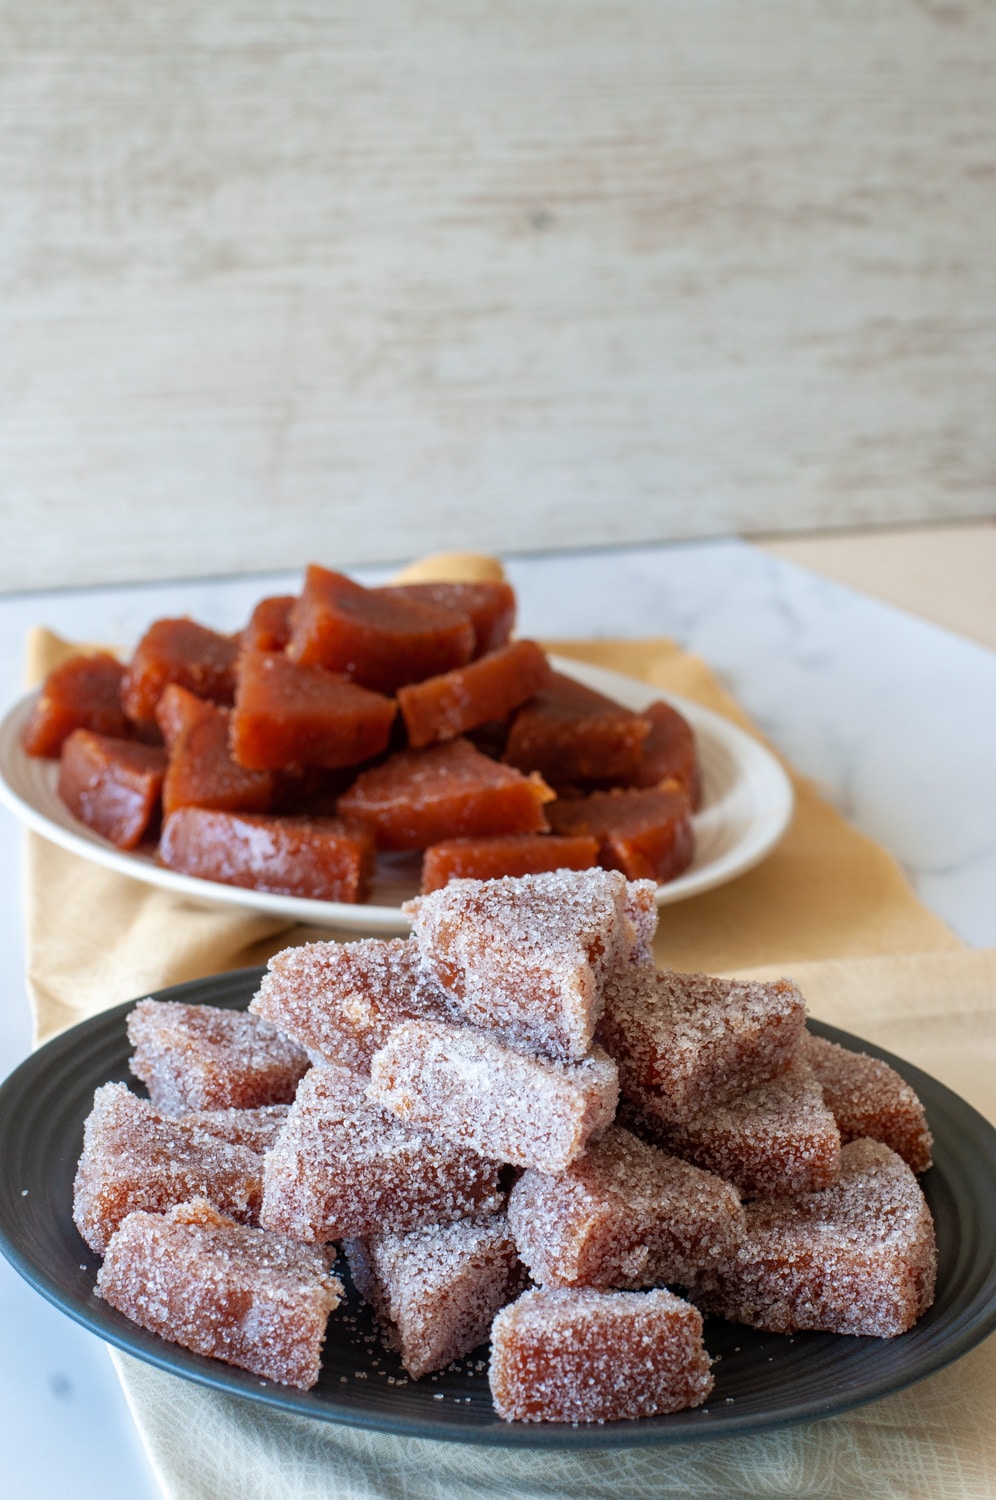 Quince Paste served plain or coated with sugar